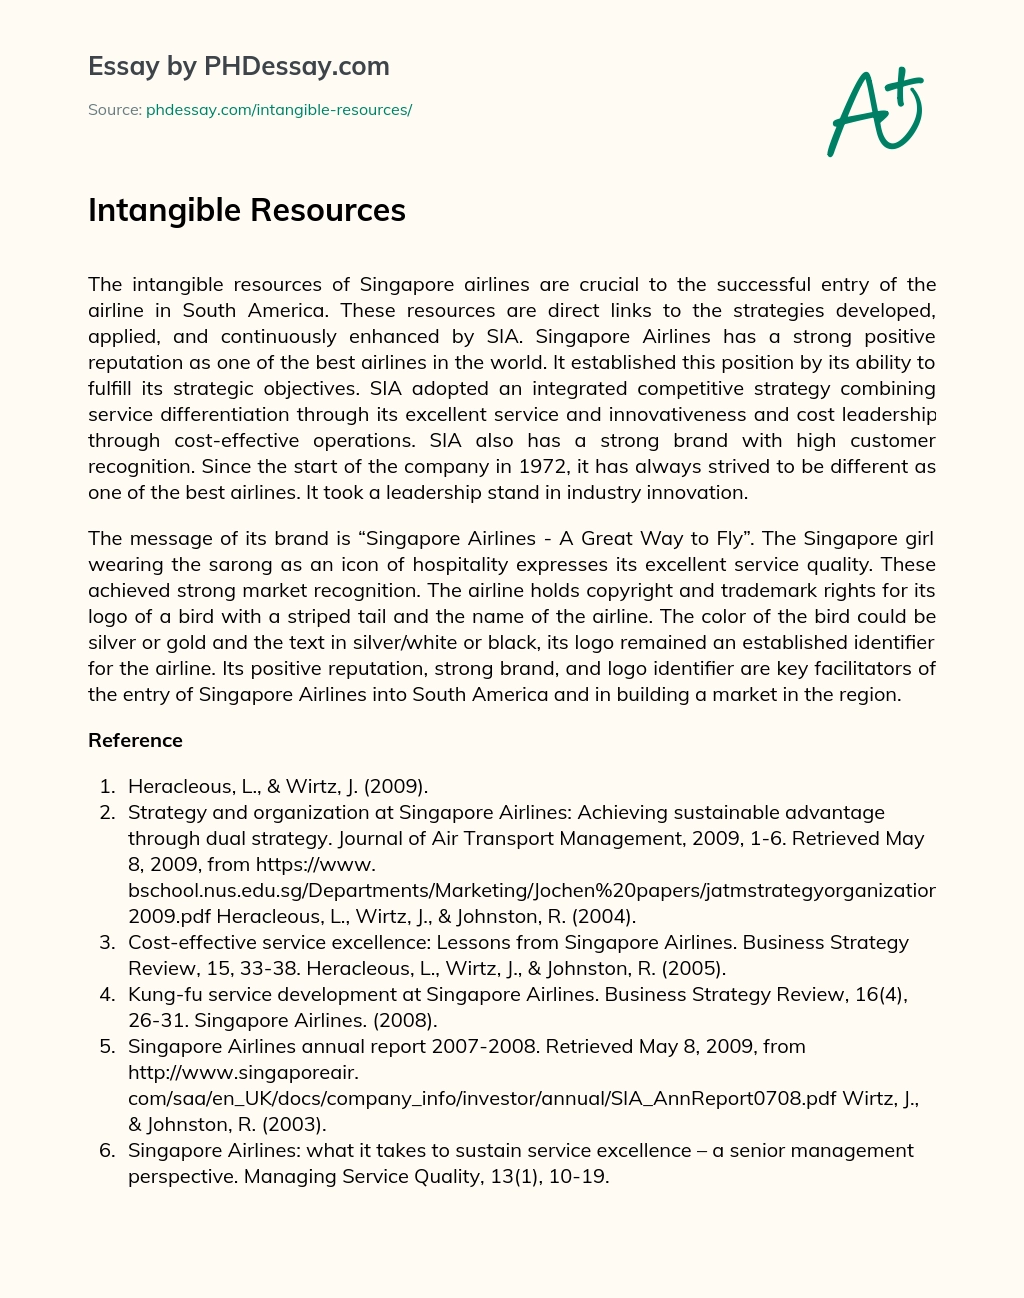 Intangible Resources essay